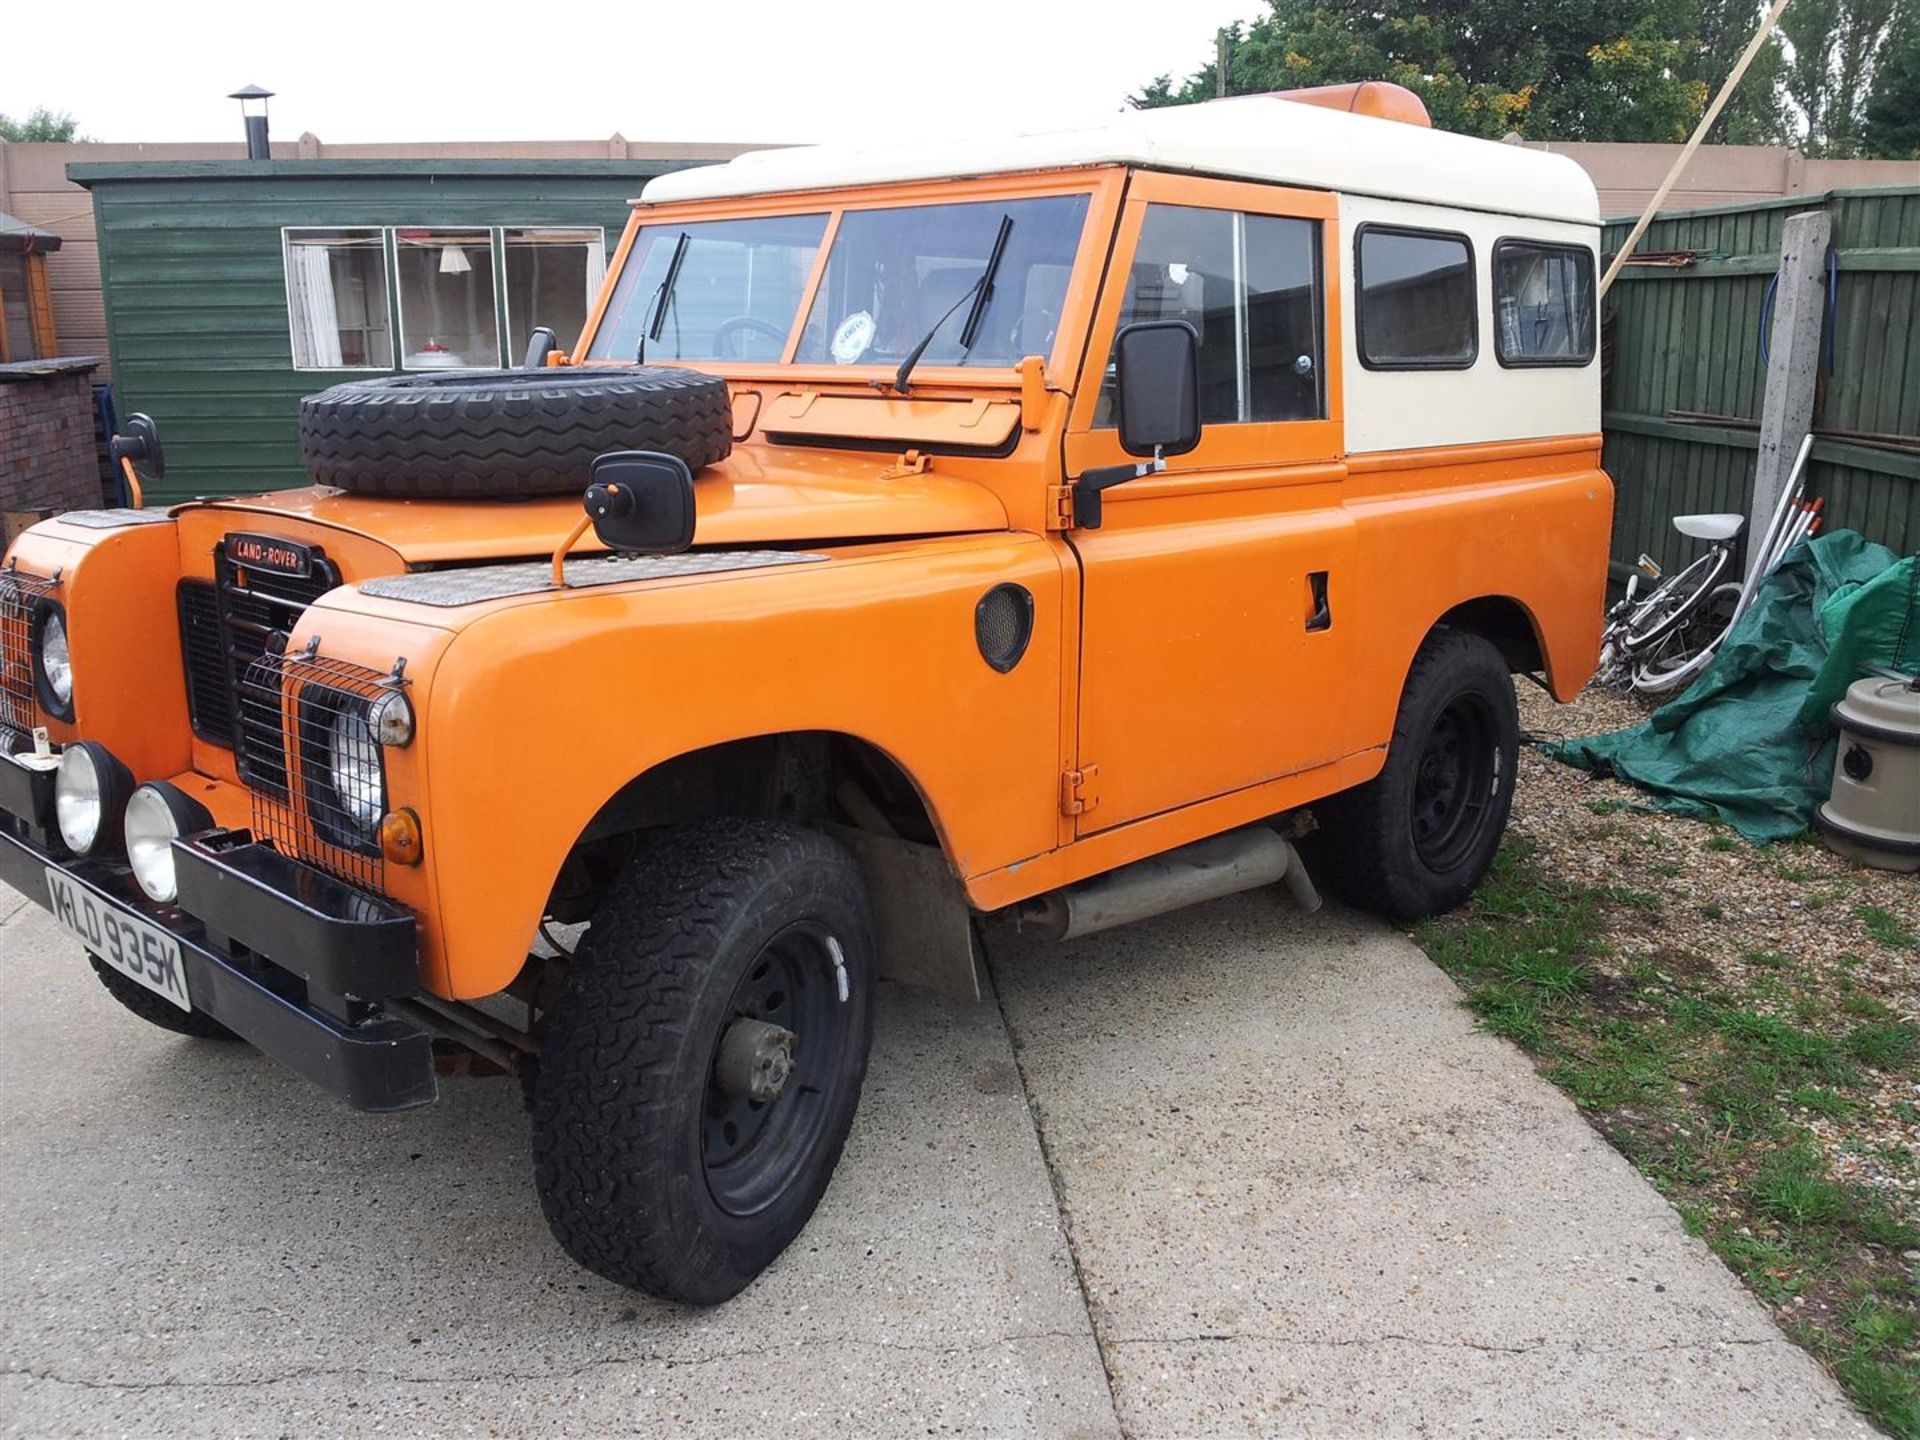 1972 Land Rover Series 3 Reg. No. KLD 935K Chassis No. 90102031A This 2.8 litre diesel Series 3 is